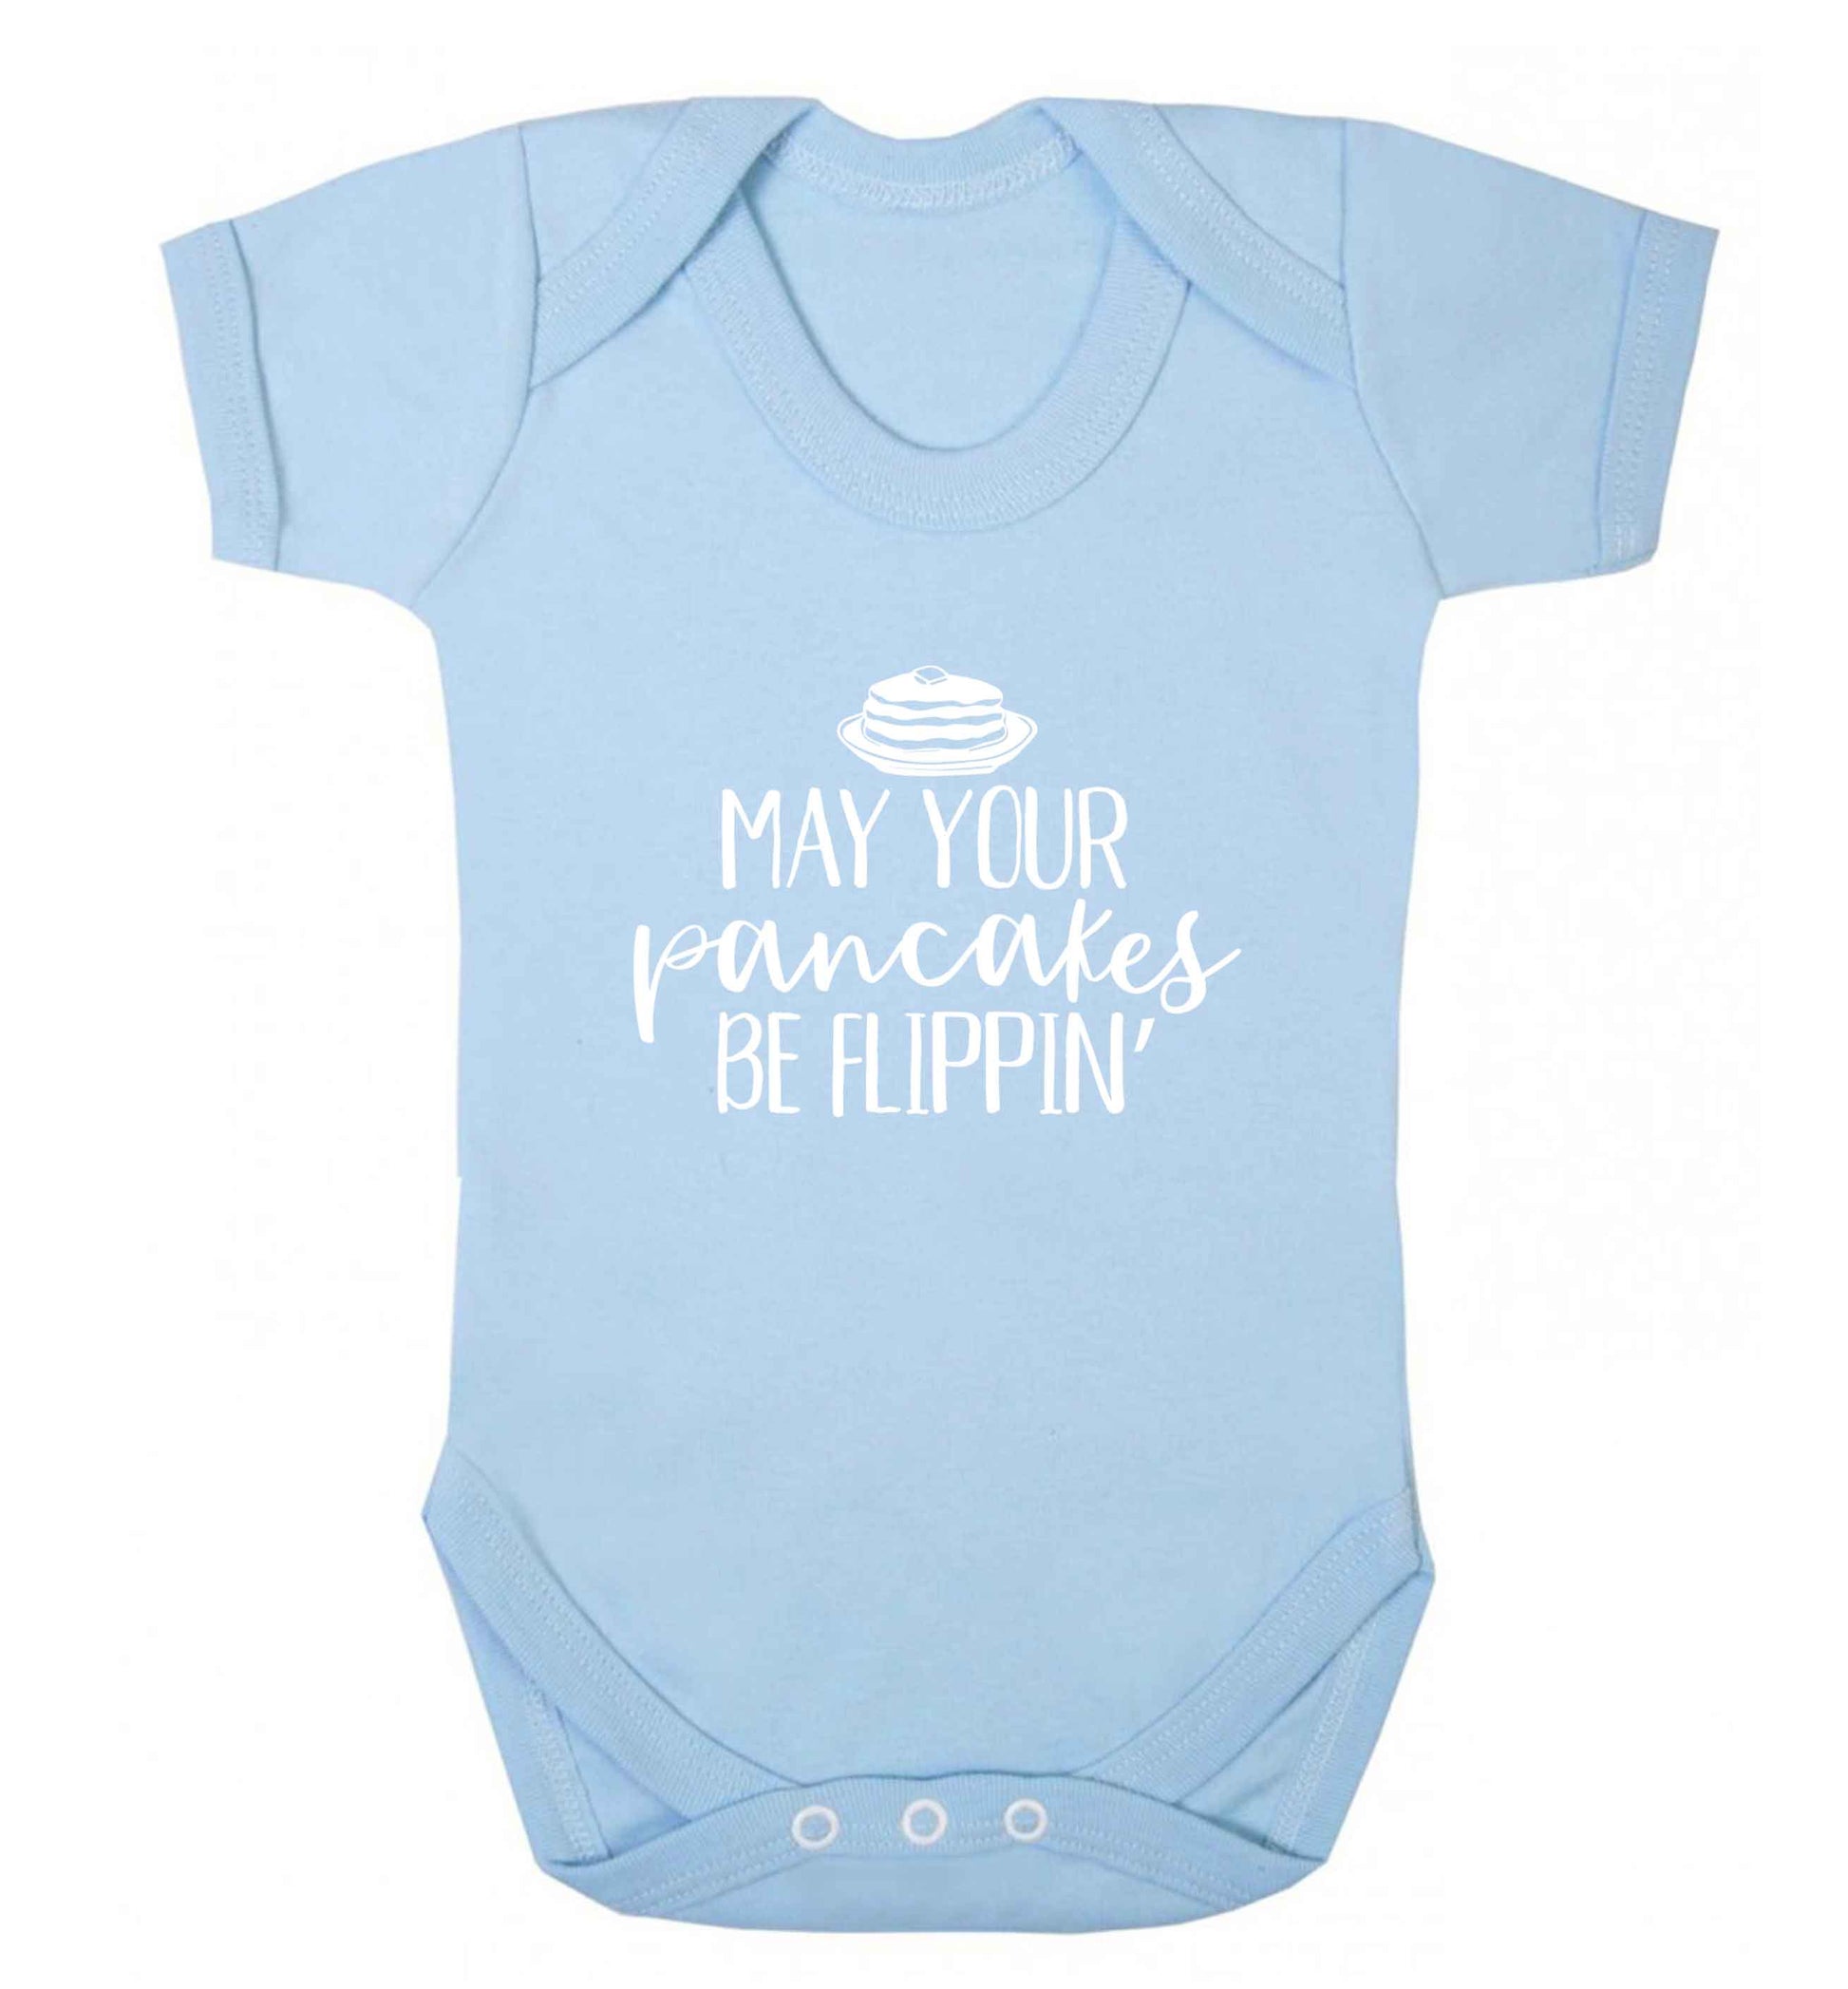 May your pancakes be flippin' baby vest pale blue 18-24 months